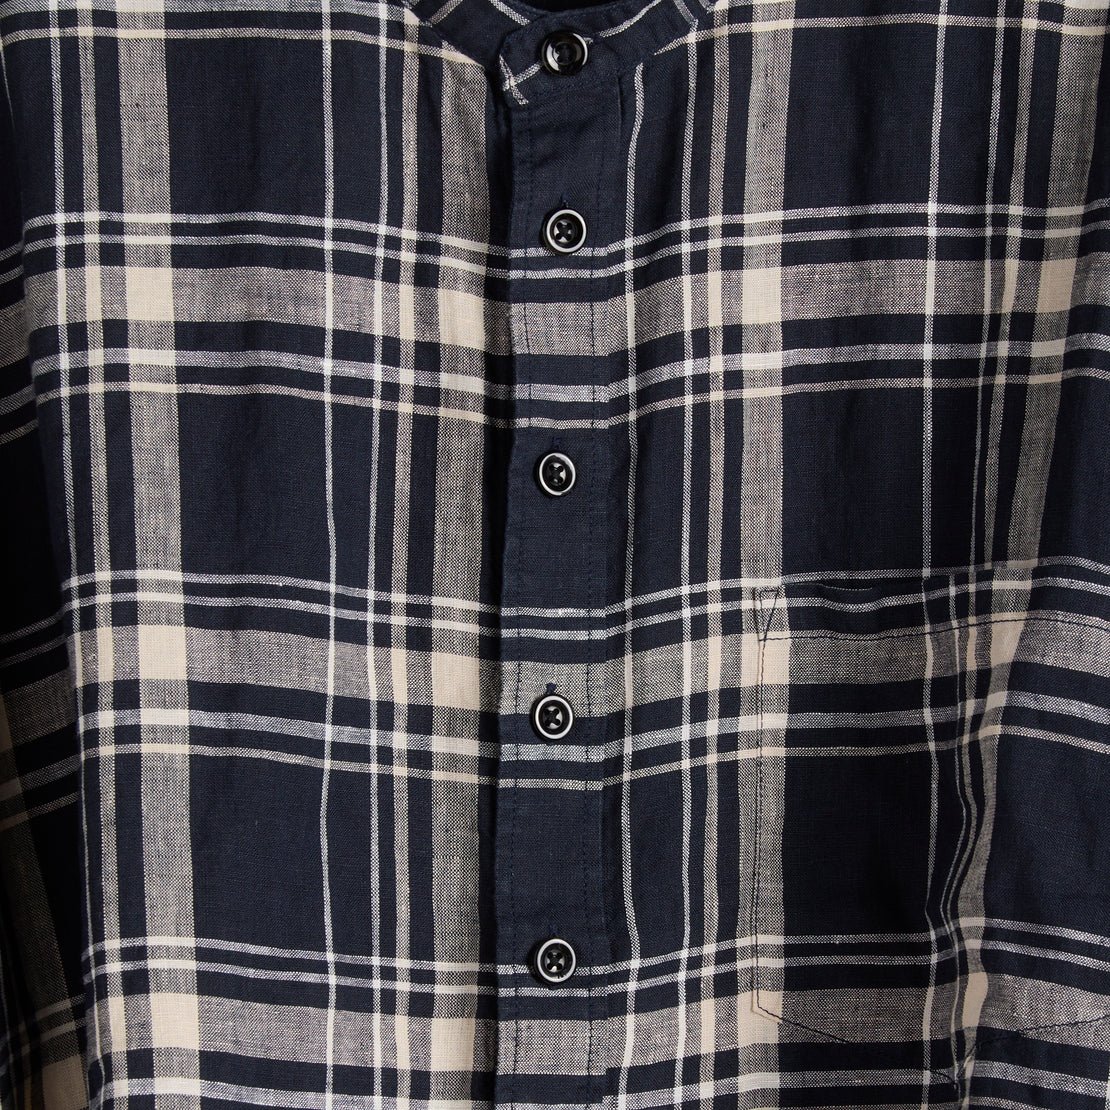 Oversized Linen Check S/S Shirt - Dark Navy - BEAMS BOY - STAG Provisions - W - Tops - S/S Woven